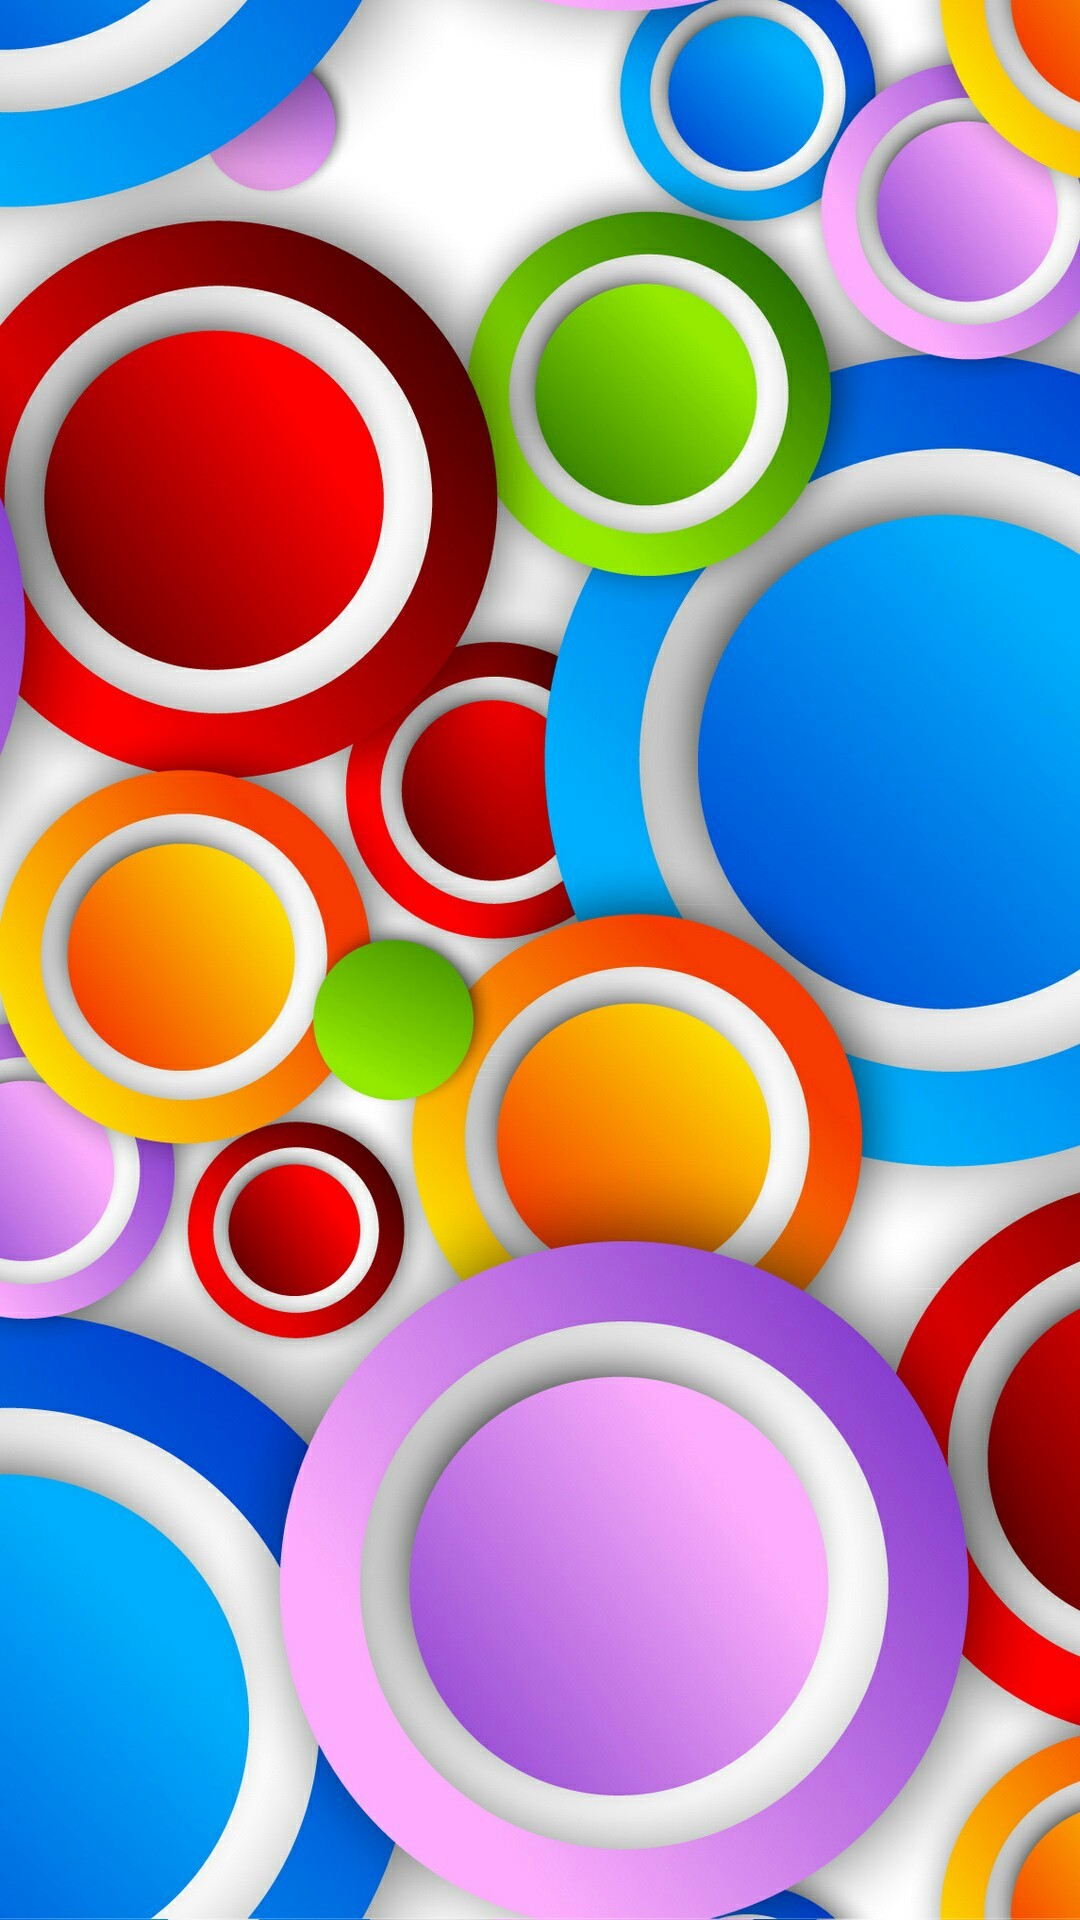 1080x1920 Colorful Circles with White Trim Wallpaper